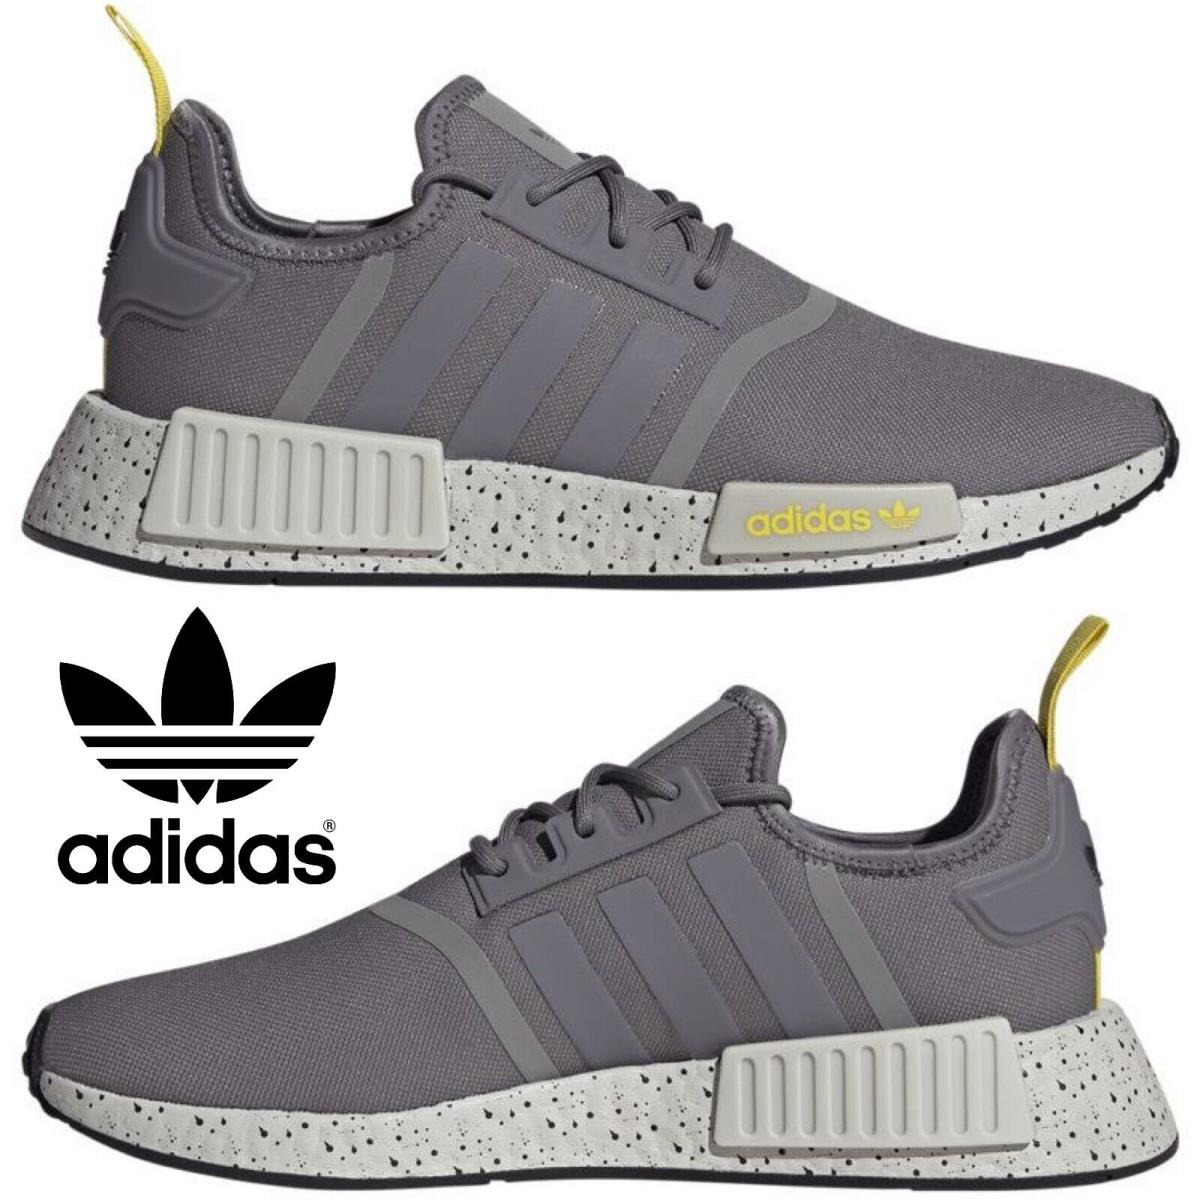 Adidas Originals Nmd R1 Men`s Sneakers Running Shoes Gym Casual Sport Gray